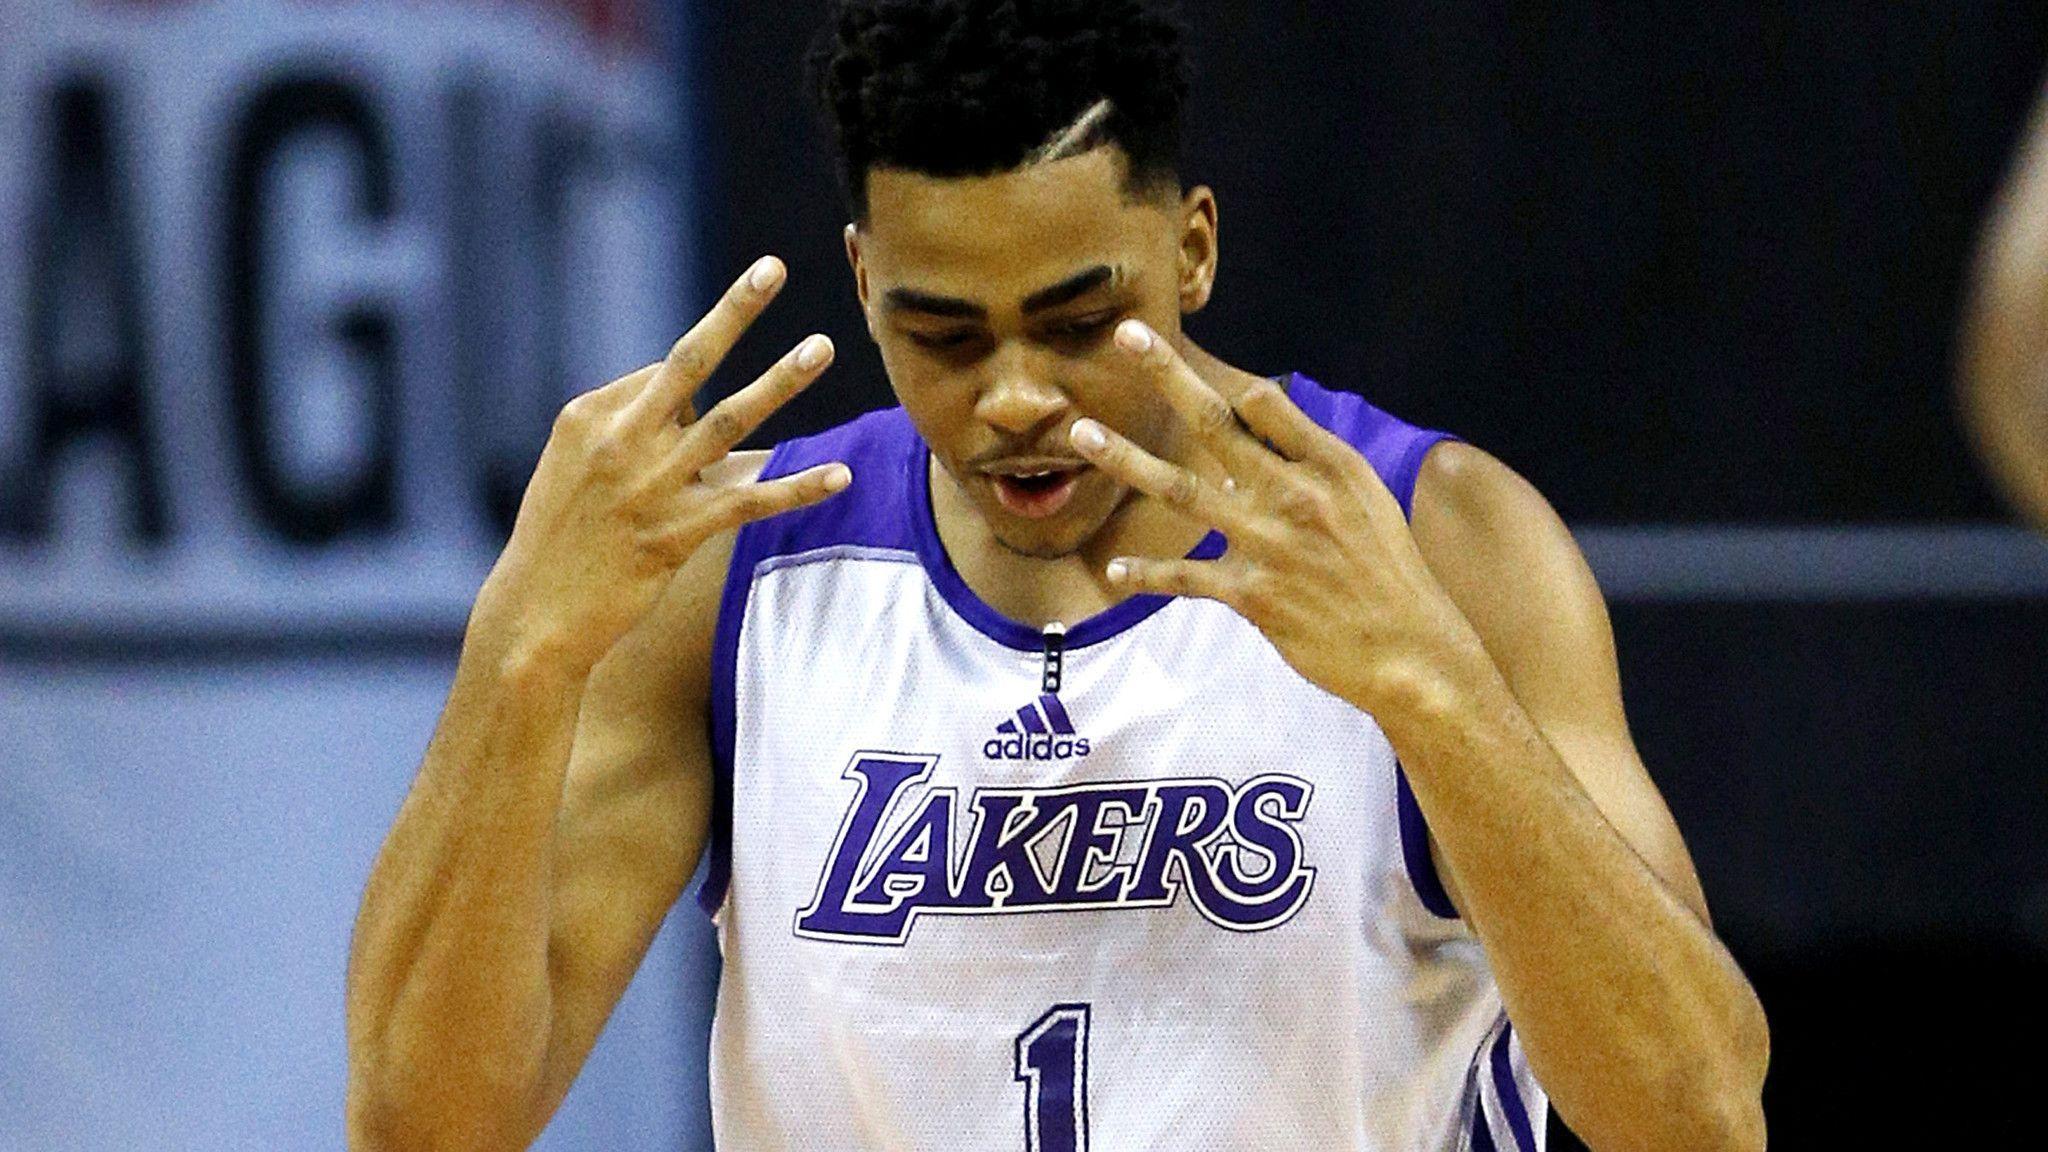 VIDEO: D'Angelo Russell Hits The Game Winner For The Lakers